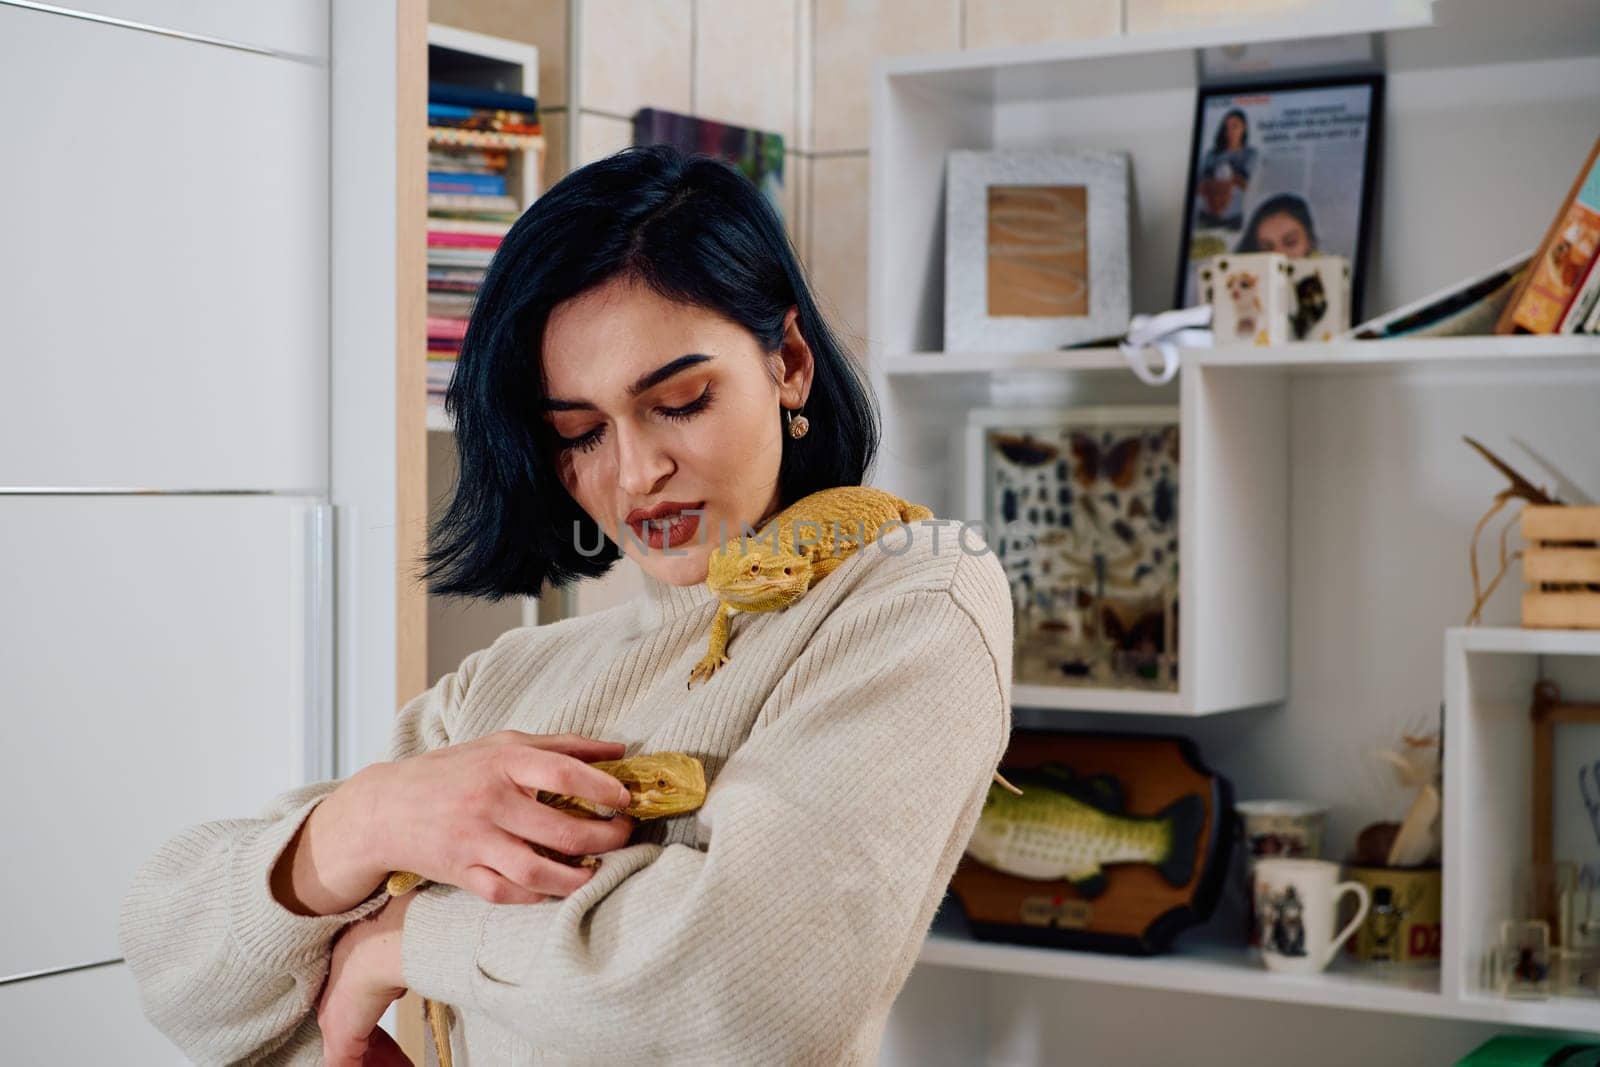 Beautiful Woman Posing with Her Two Adorable Bearded Dragon Pets by dotshock